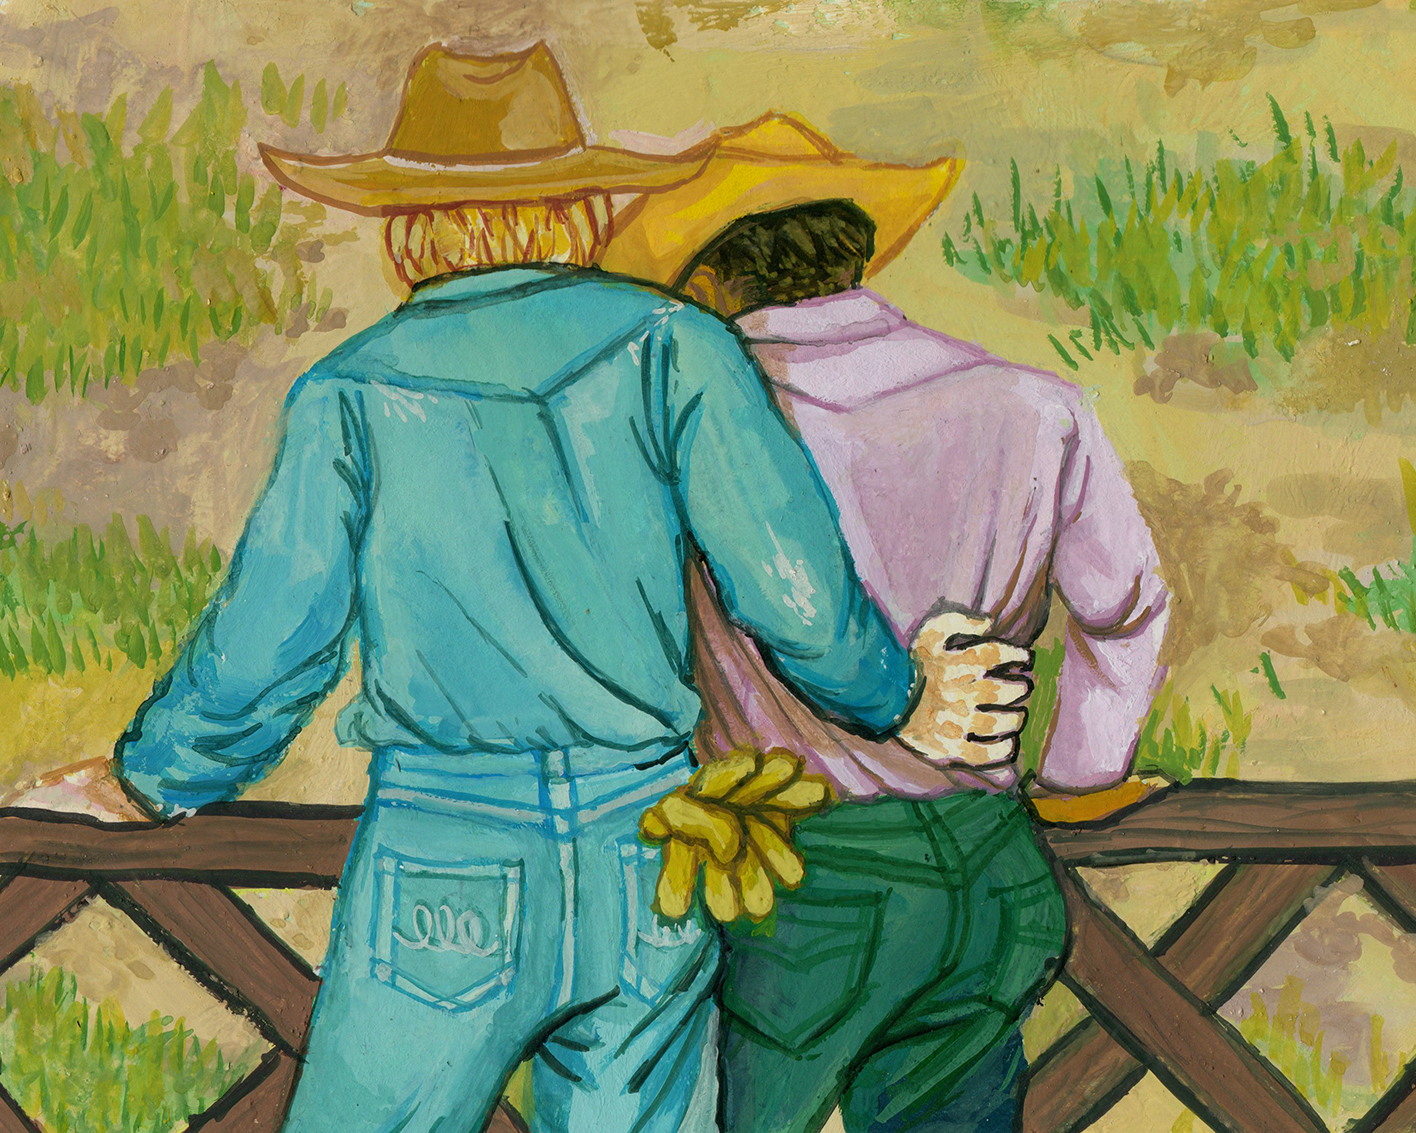 the backs of guy and jeb leaning on a fence. guy wears blue denim, a cowboy hat and has yellow gloves sticking out his back pocket. jeb wears a pink shirt, green pants, and a yellow cowboy hat. guy's hand is on the small of jeb's back.